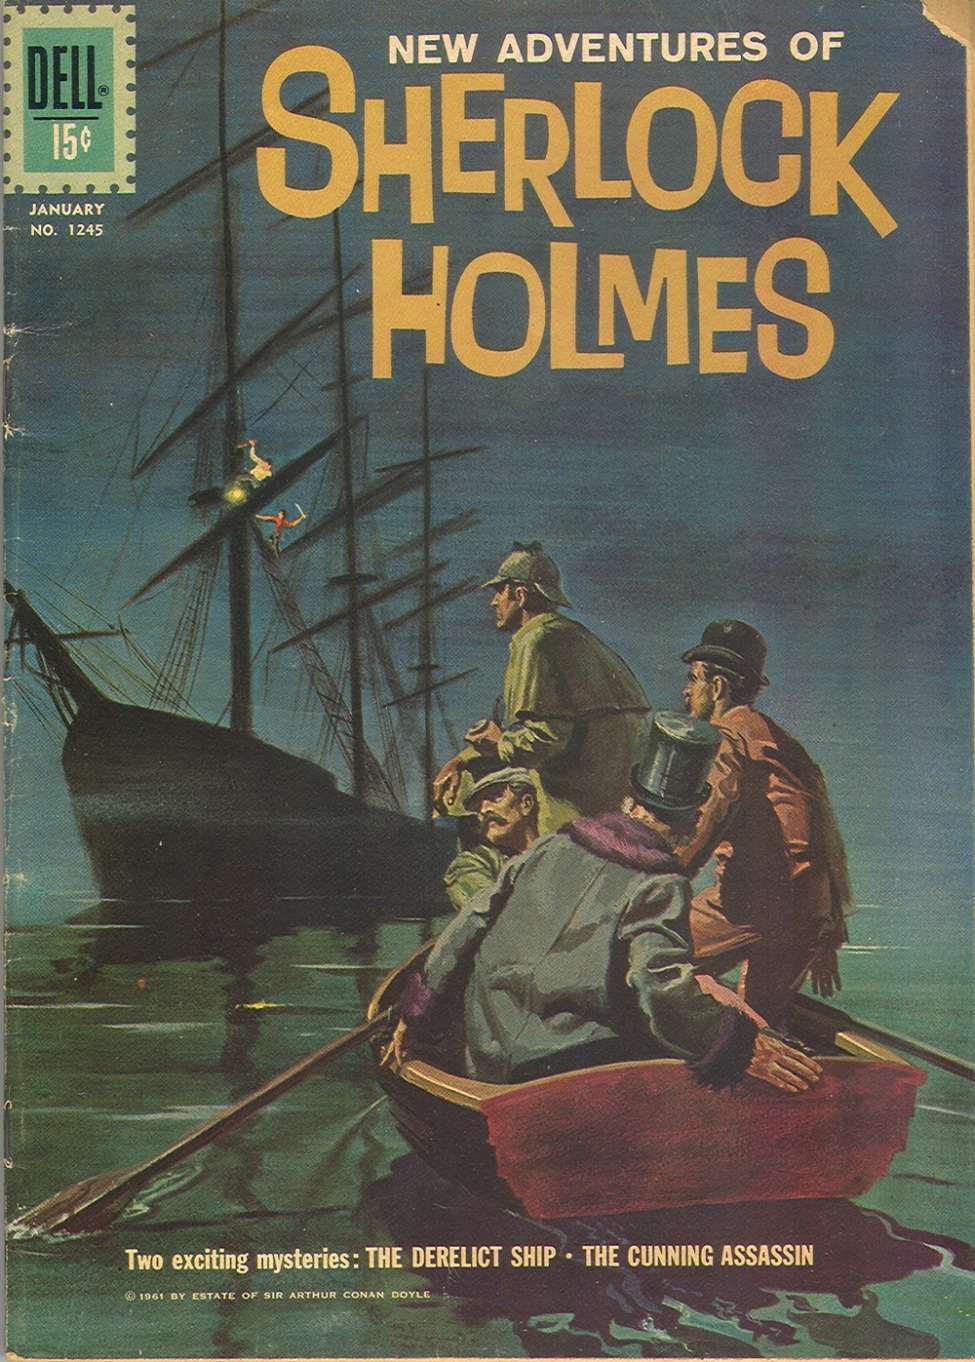 Book Cover For 1245 - New Adventures of Sherlock Holmes